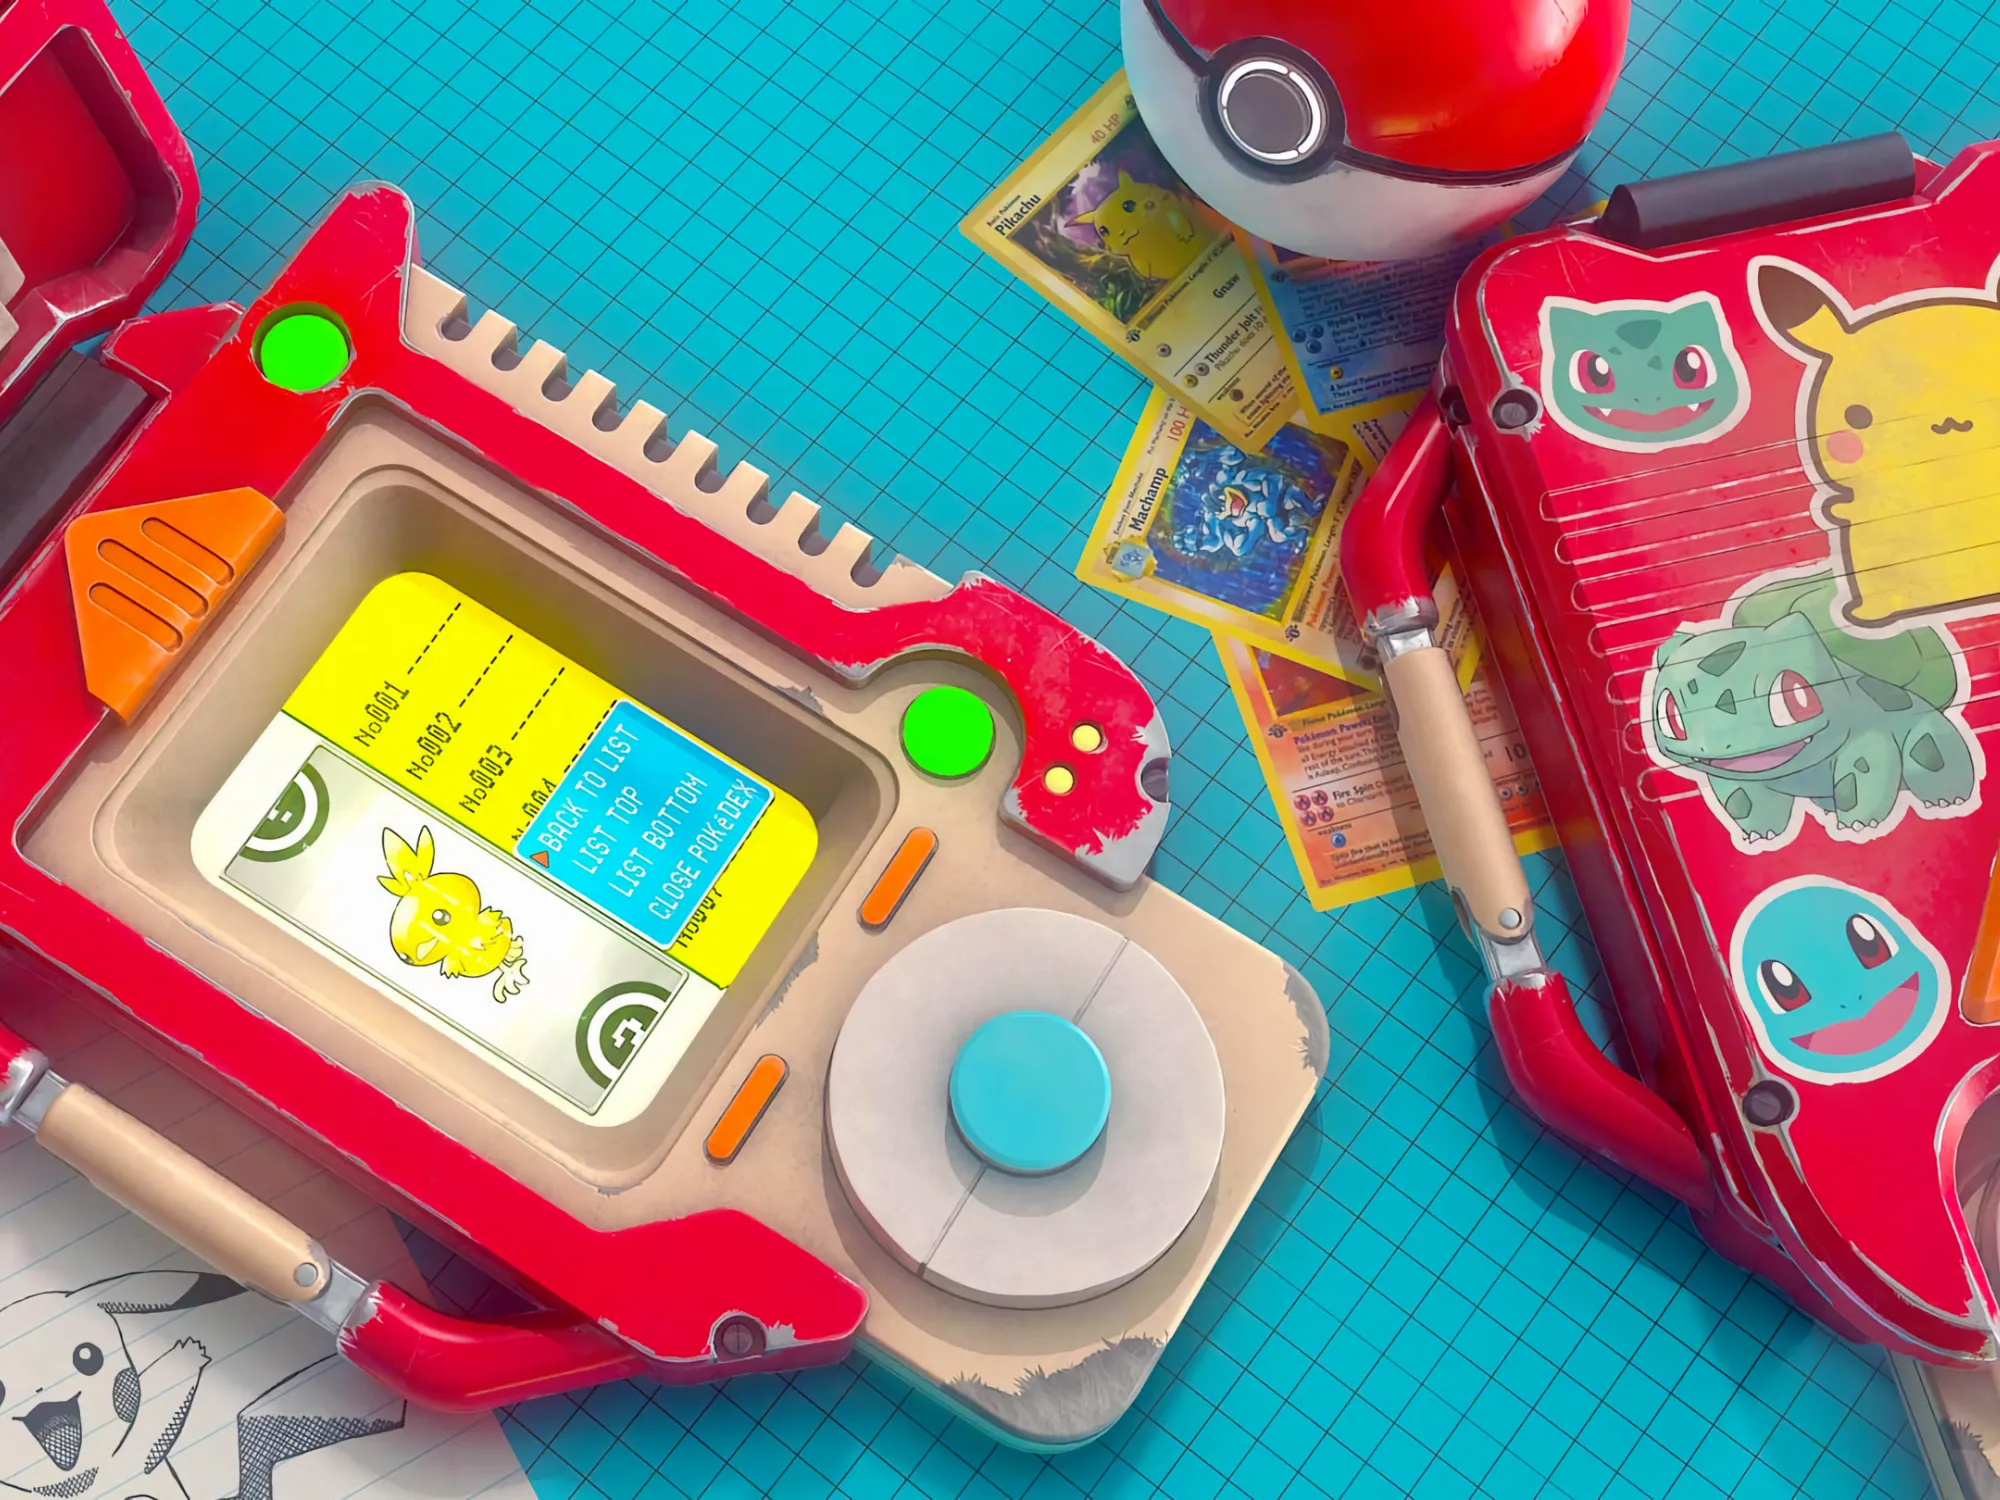 how to make a real pokedex